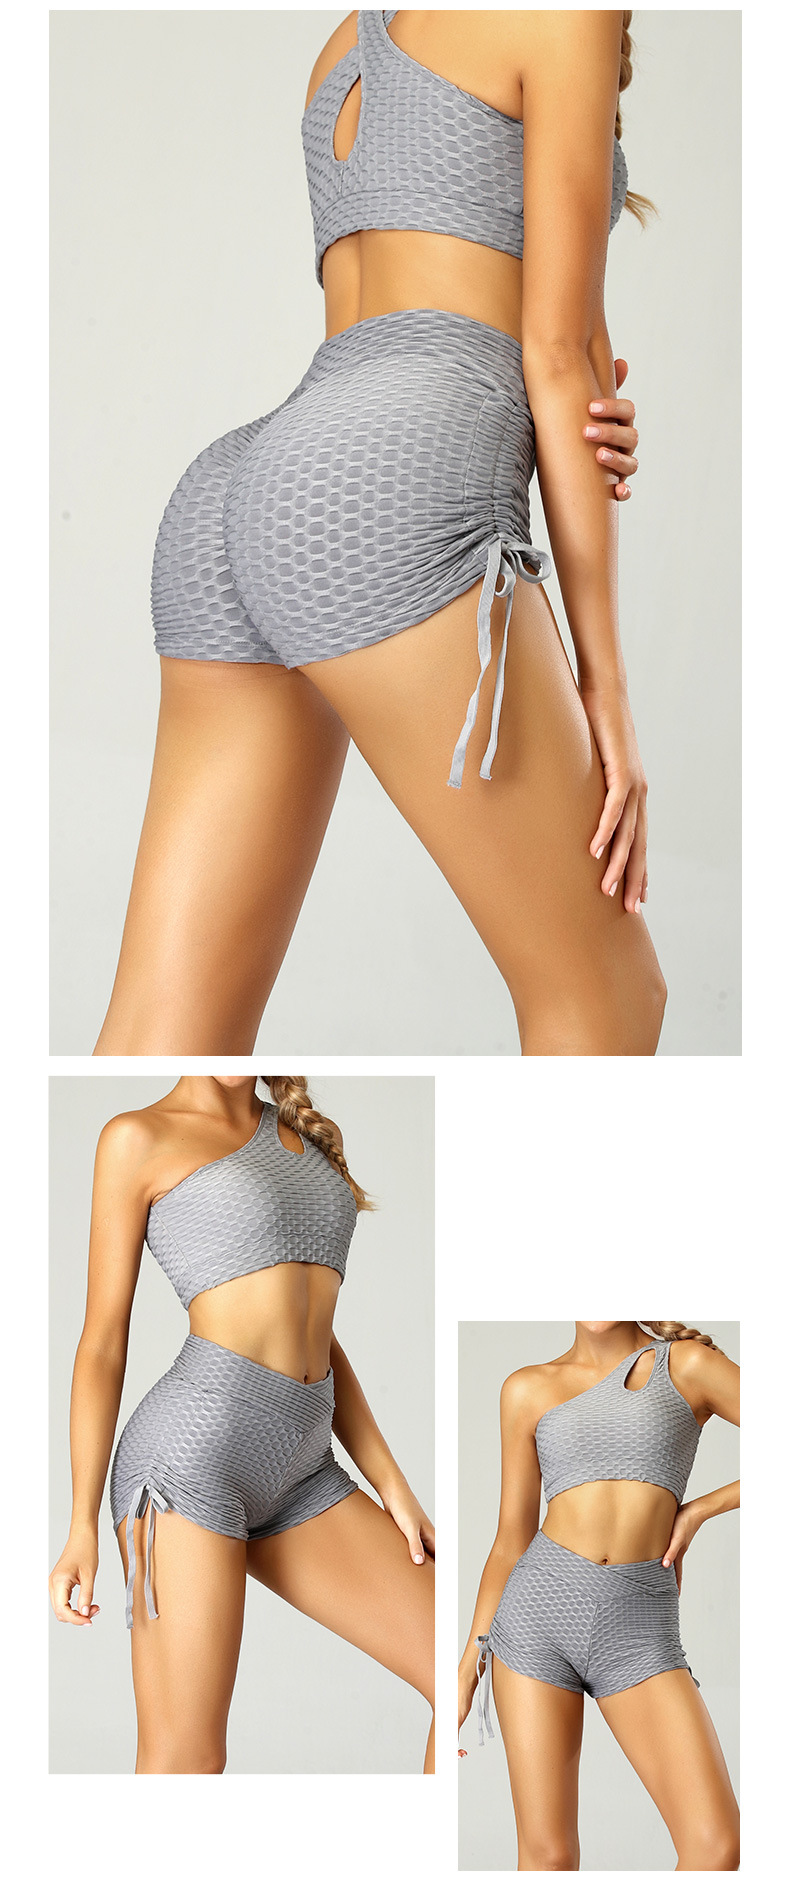 CrossOver V-Shaped Waistband Shorts with Side String, Cross Wrap V-Shaped Waistband, Overlap waist textured shorts